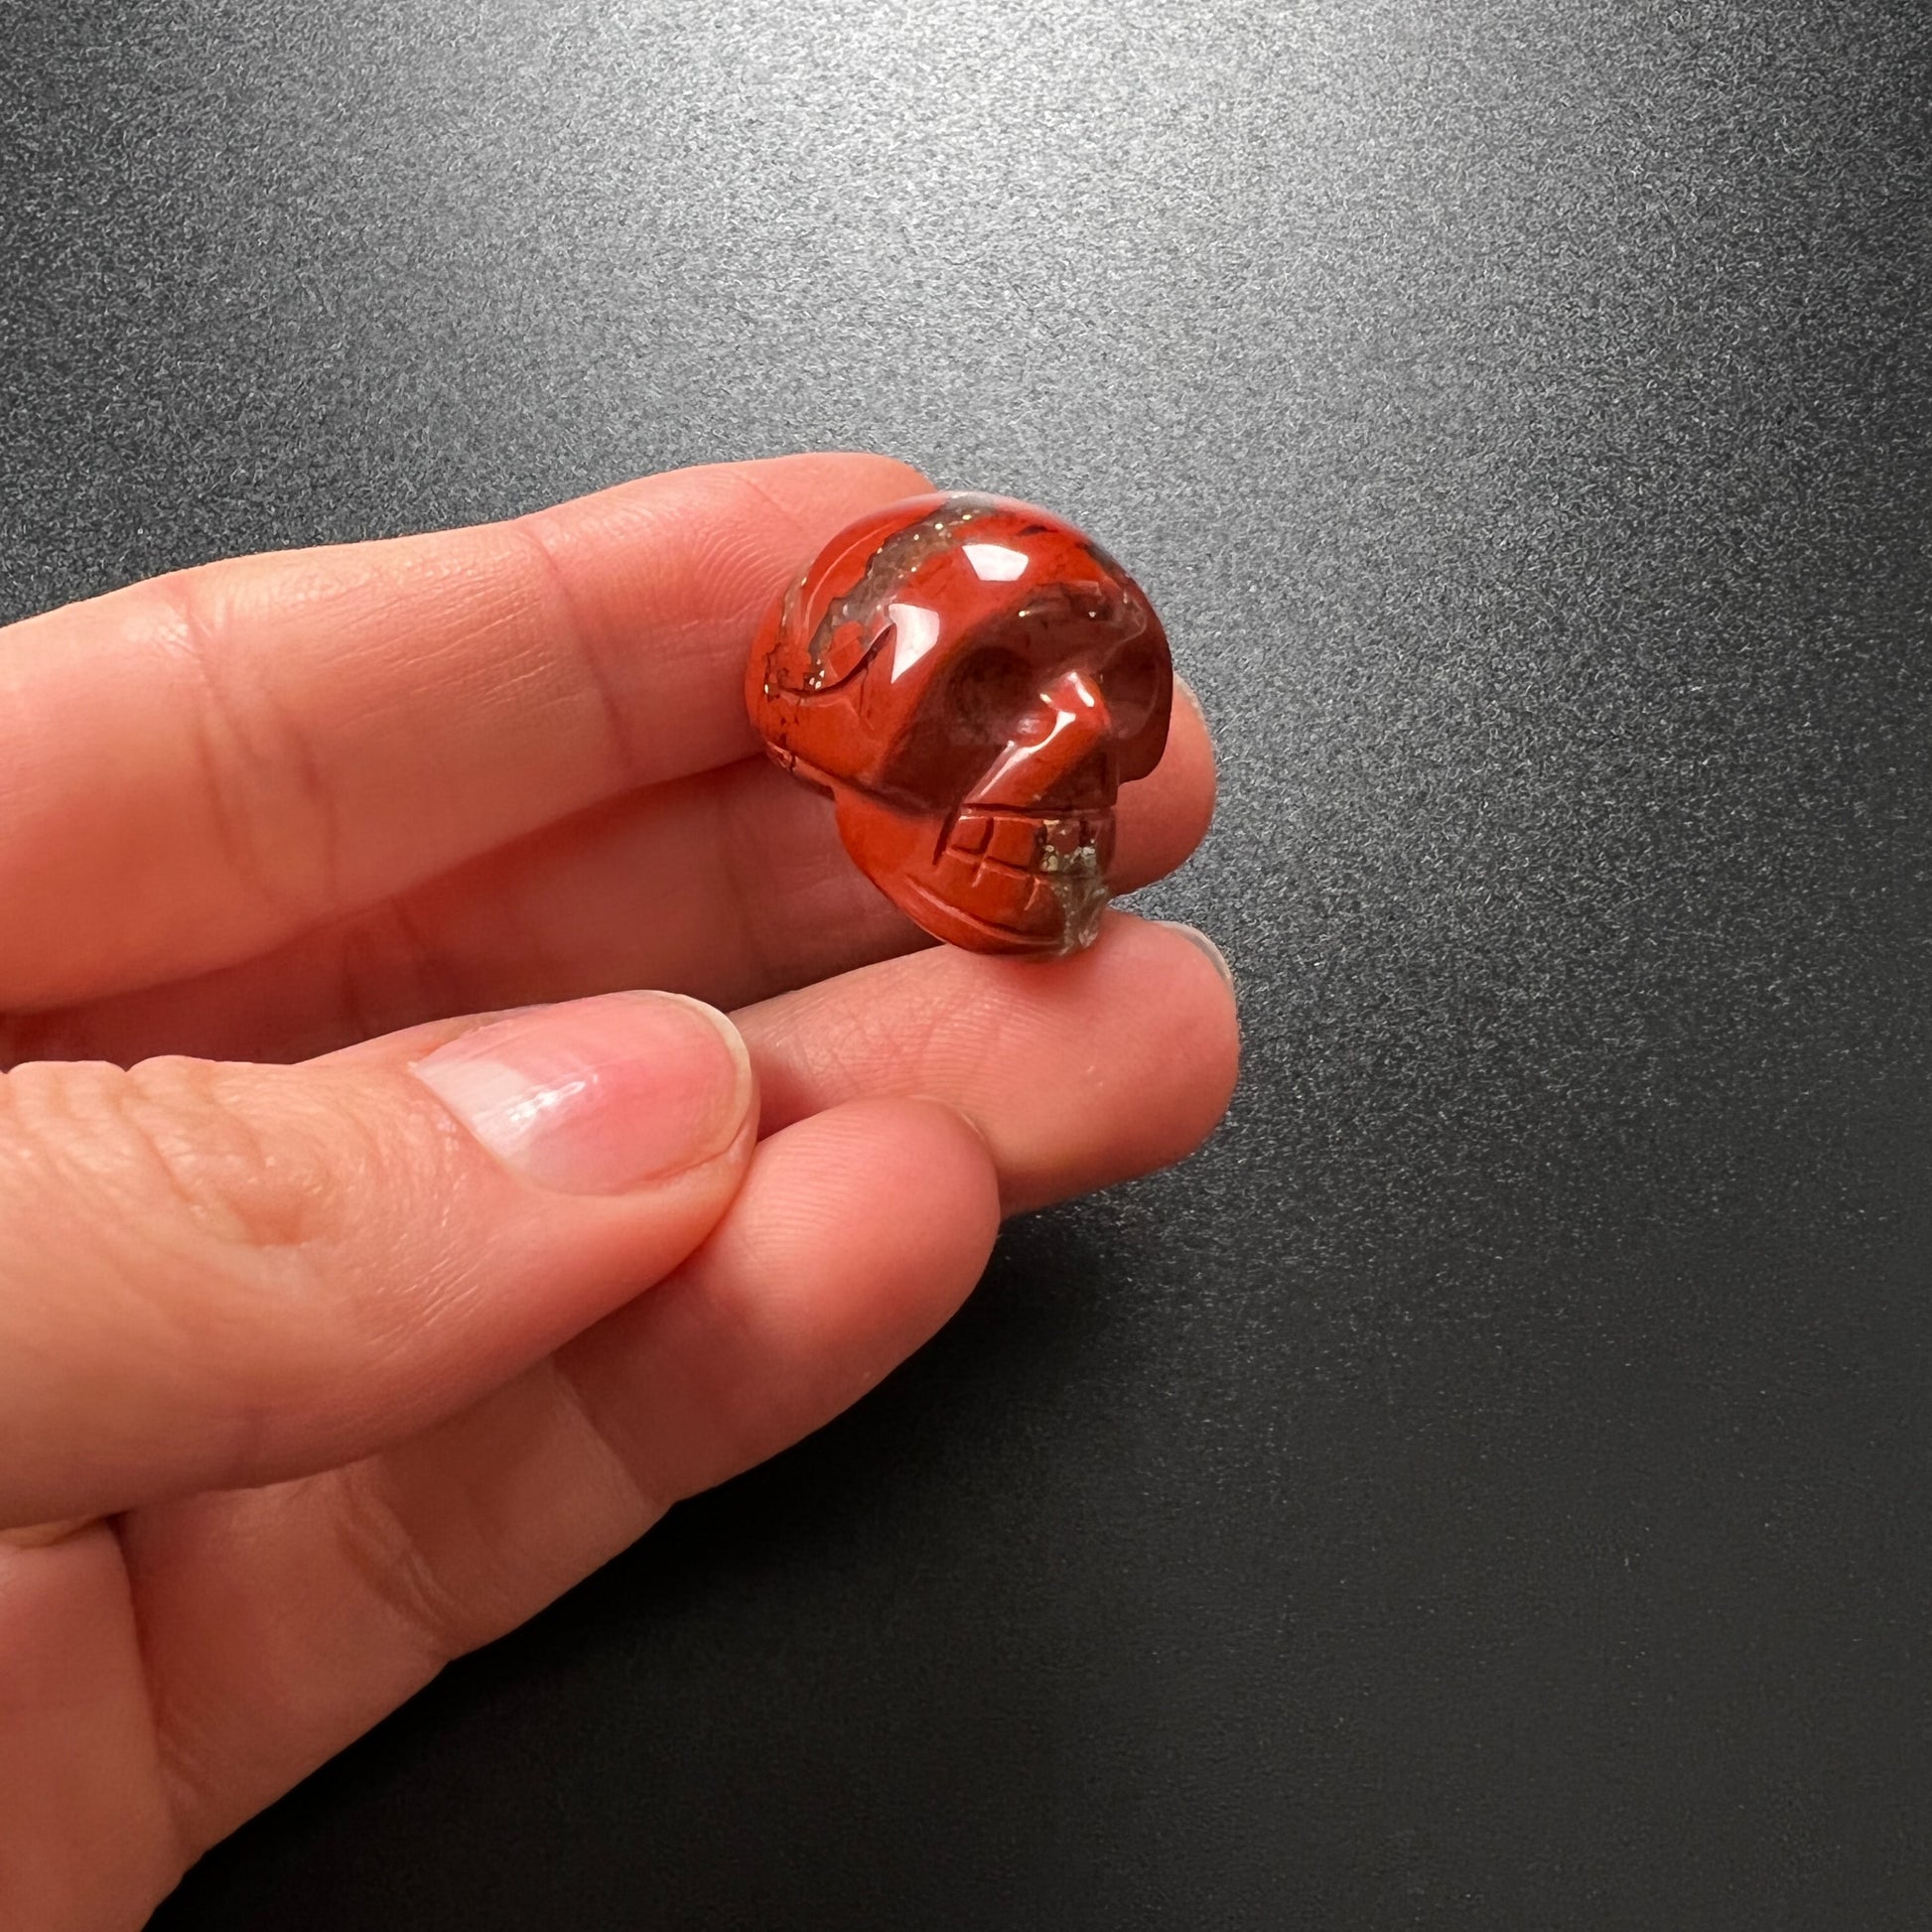 Tiny Red Jasper or Unakite gemstone skull amulet for altar, meditation, witchcraft - The French Witch shop